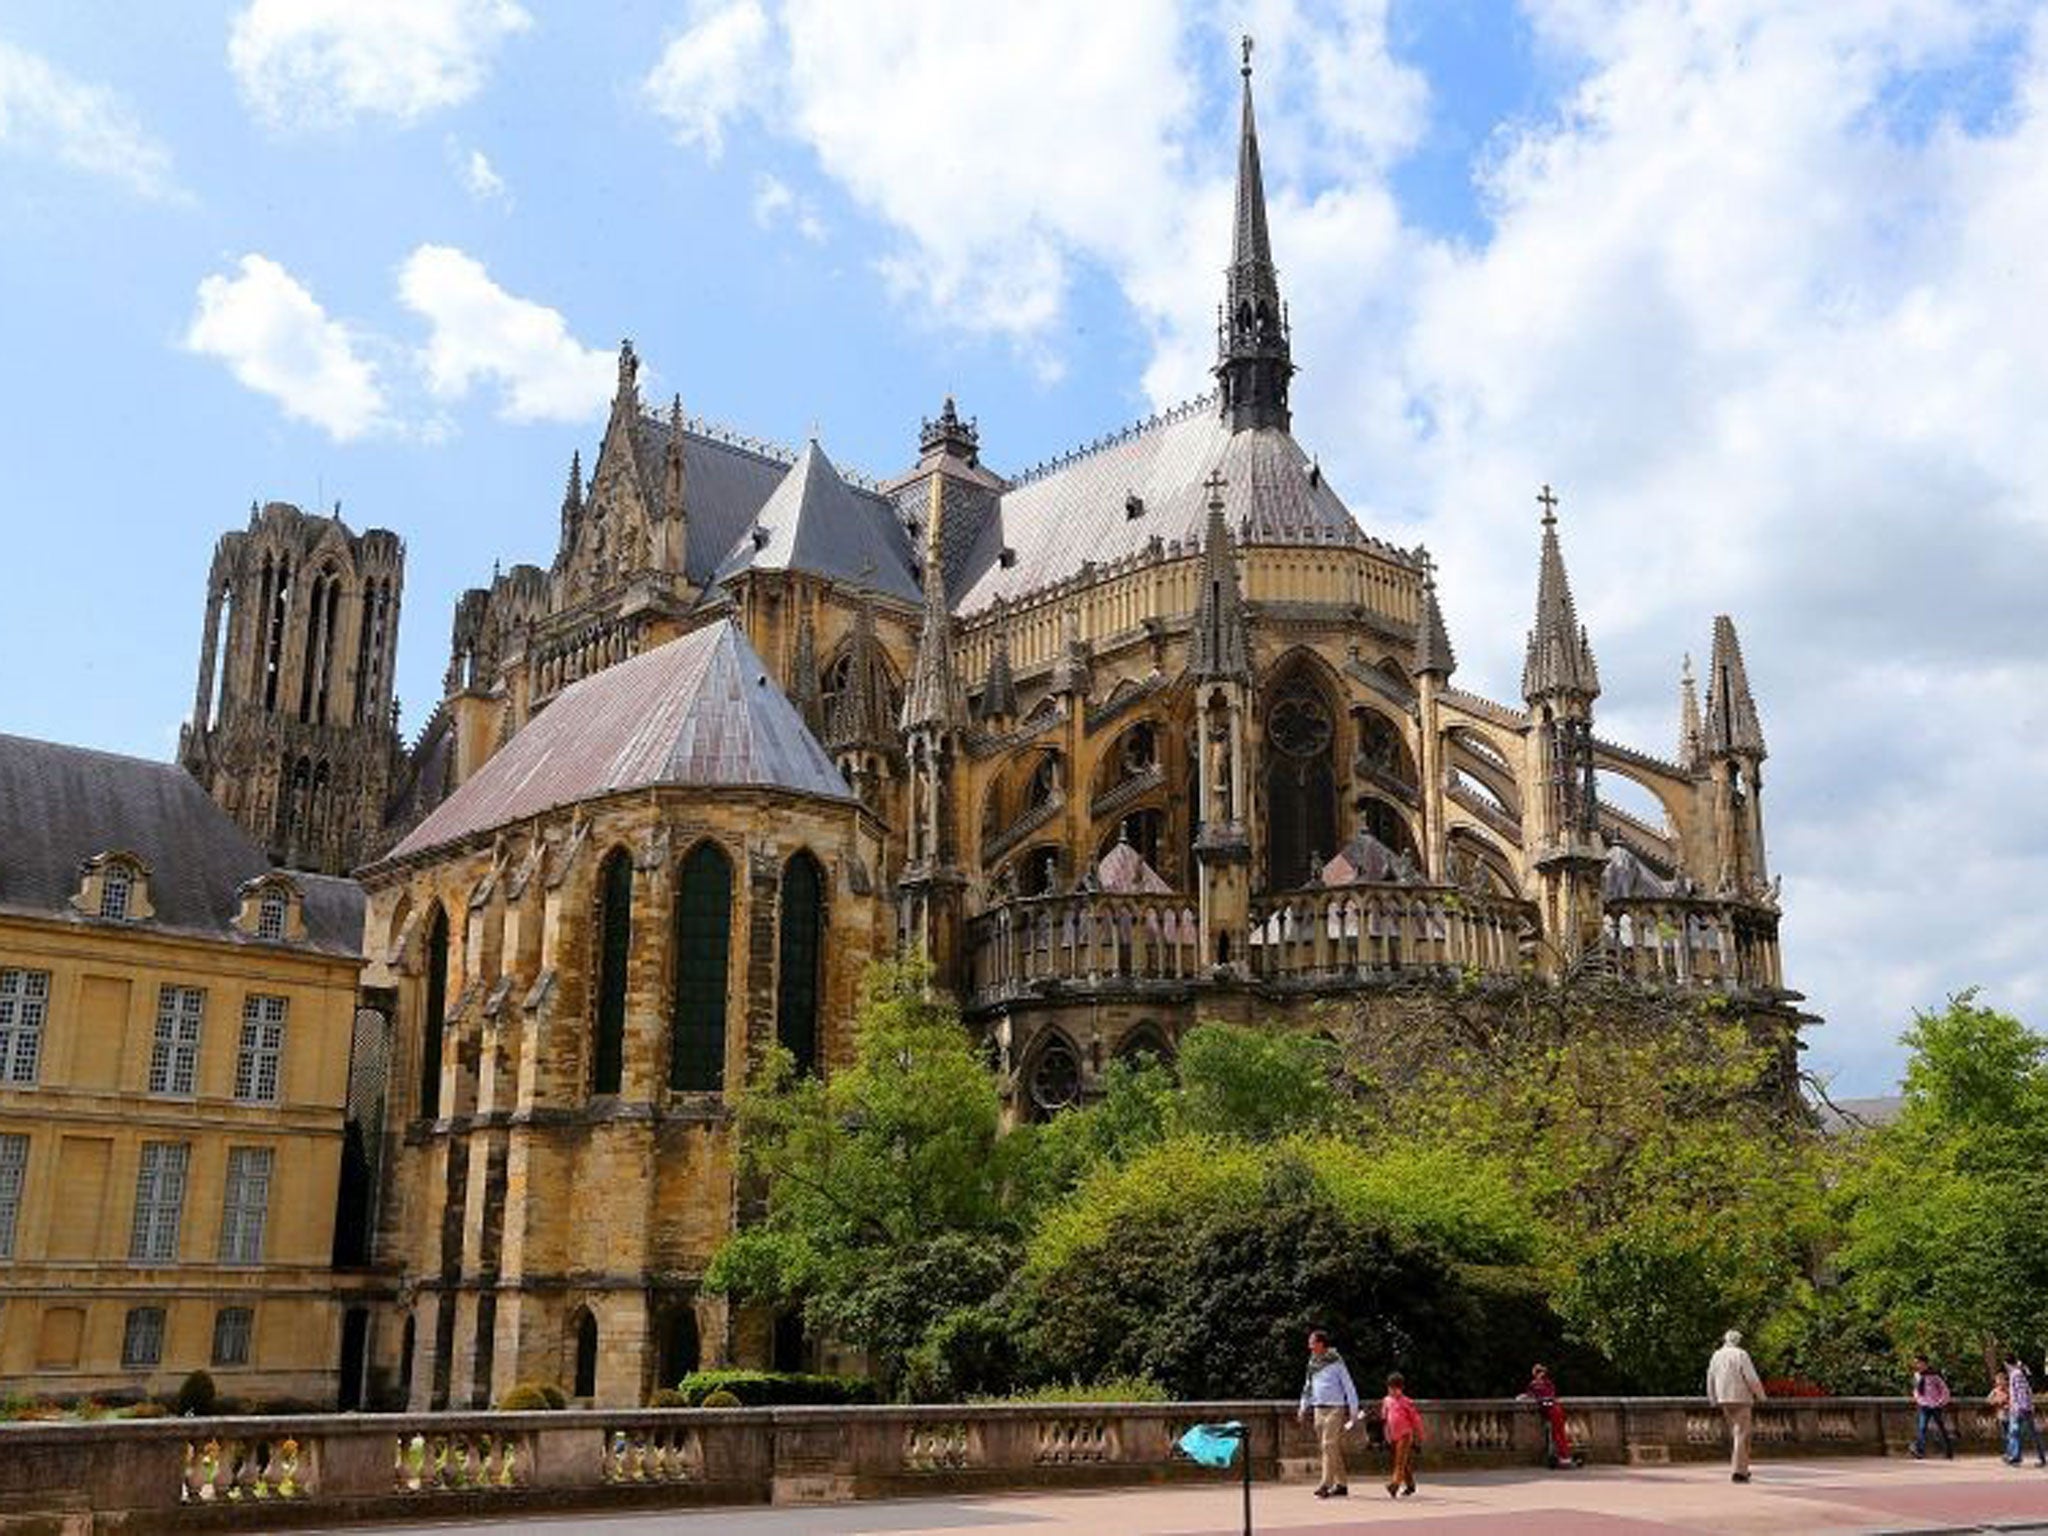 Dreaming of the spires? You can see the sights of Reims, including the cathedral, by taking up a Eurostar offer